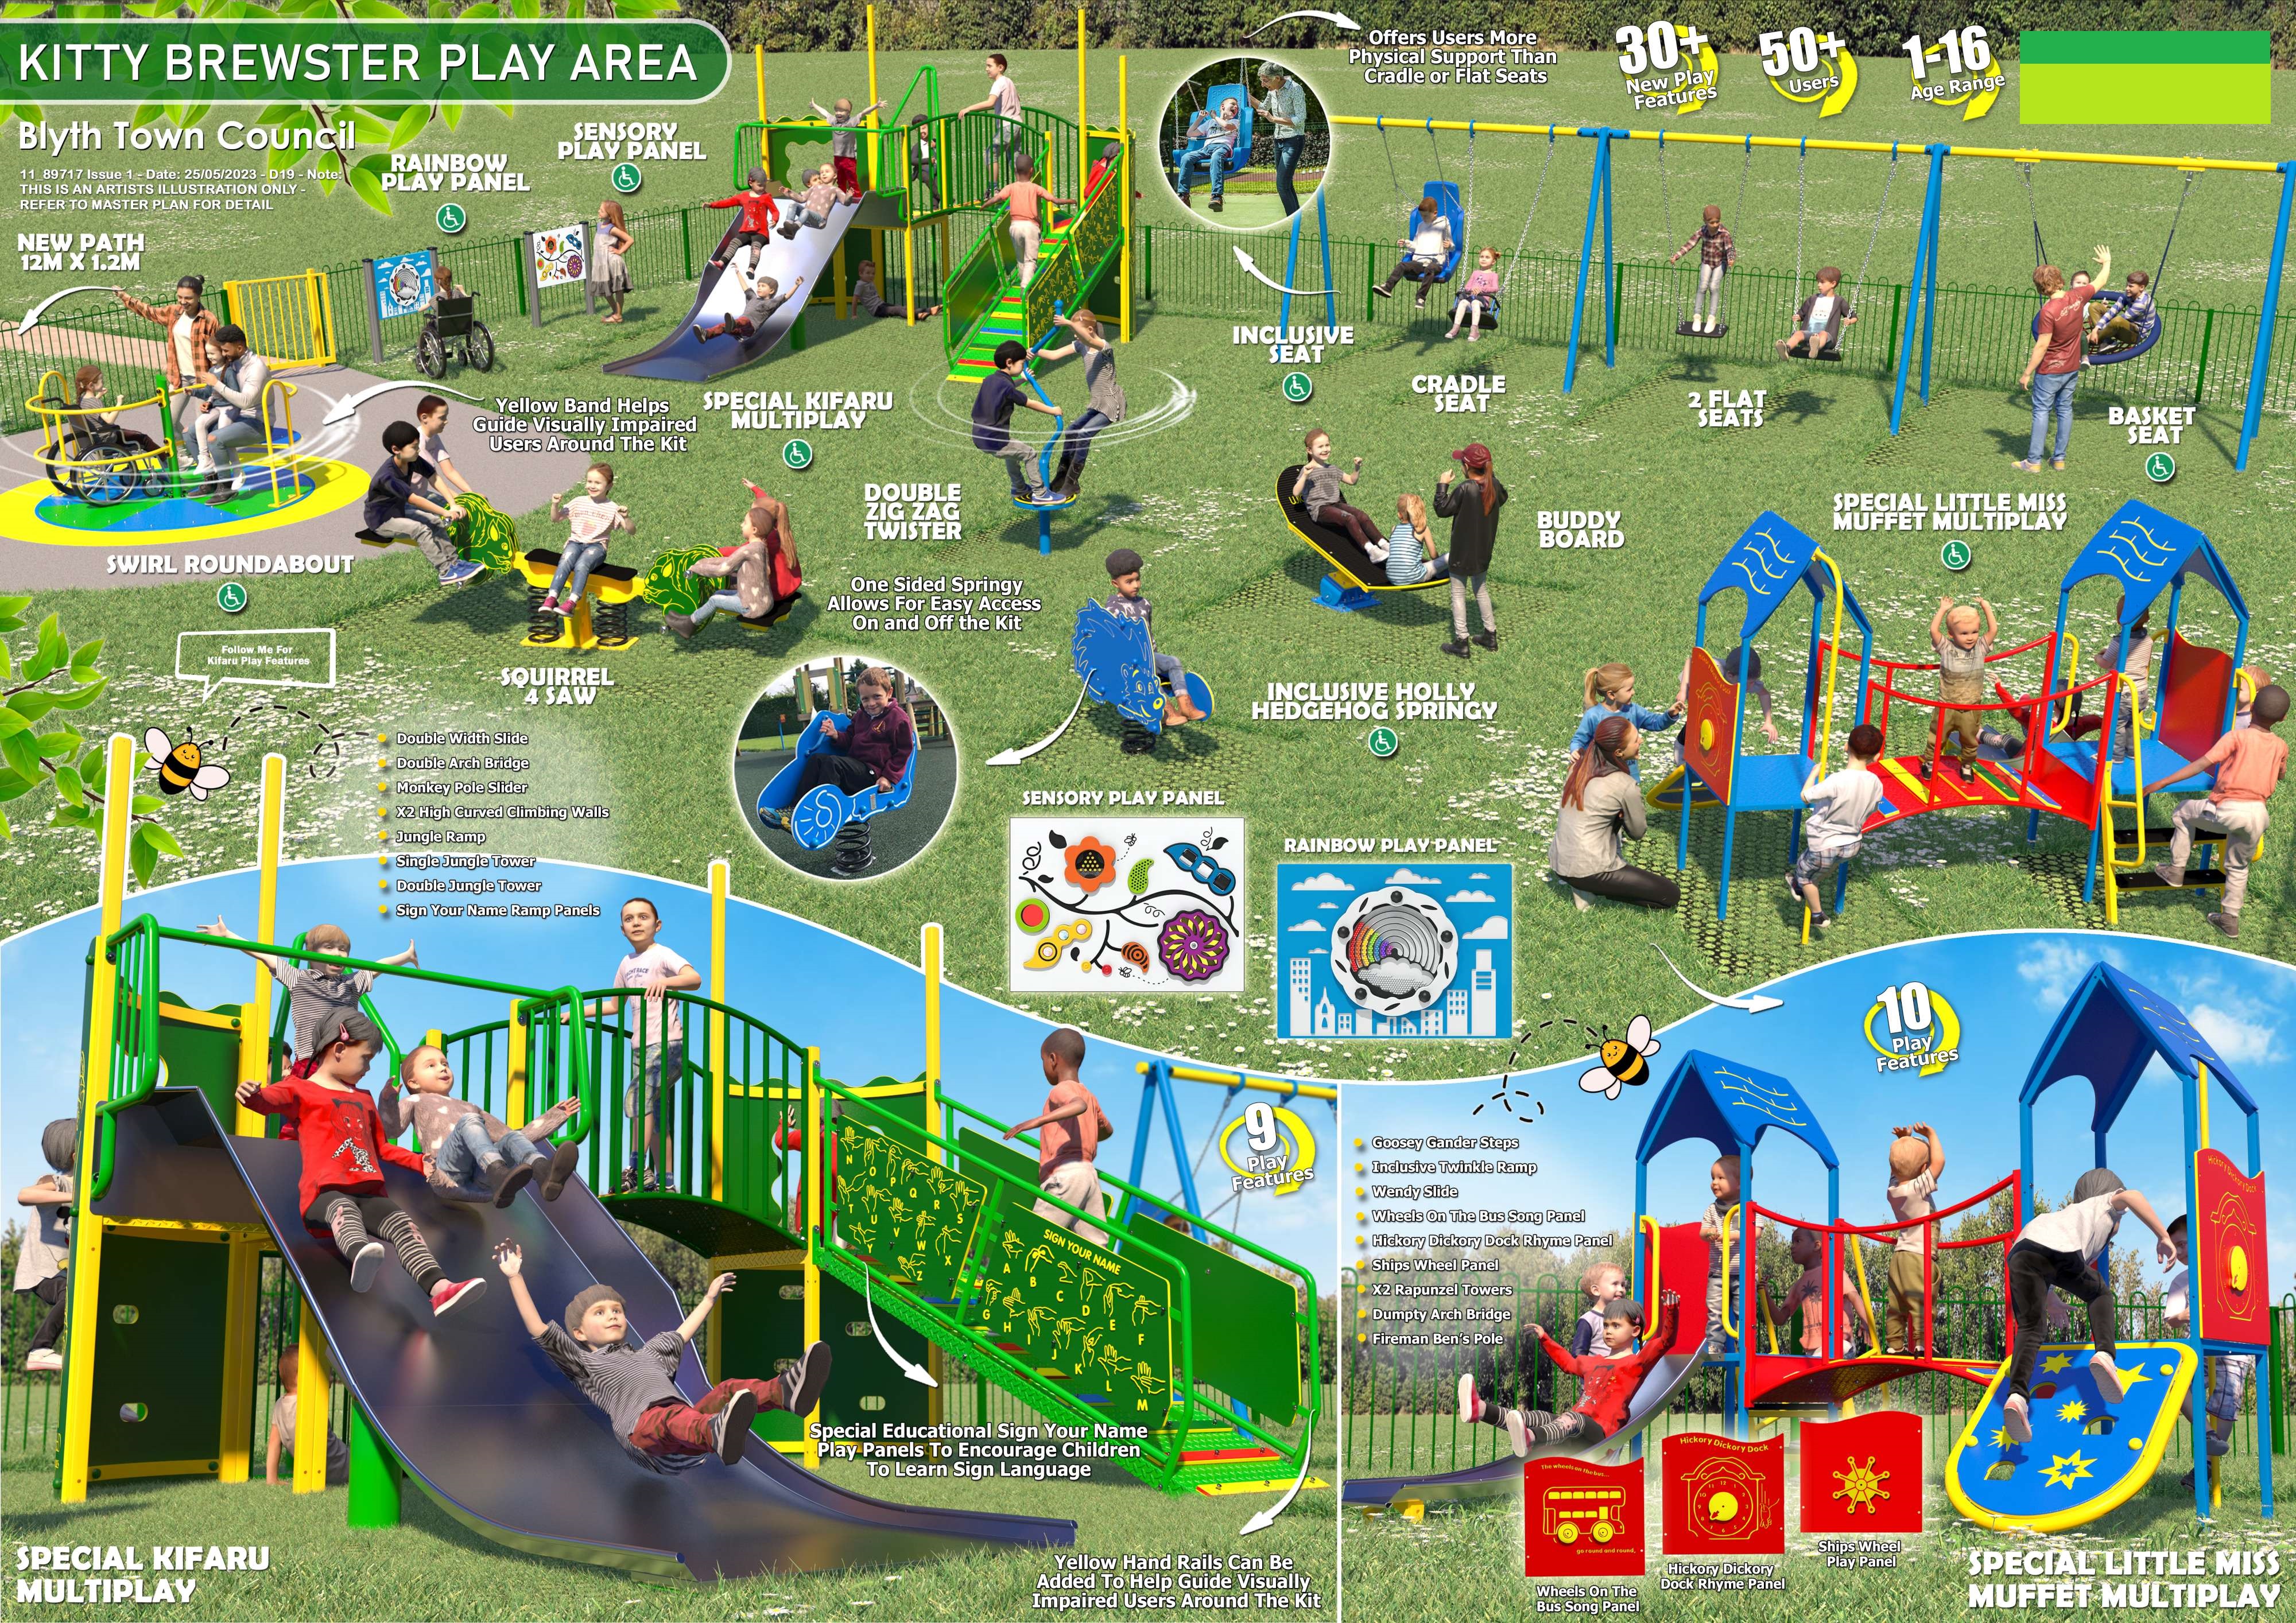 Wicksteed appointed for Kitty Brewster play area work